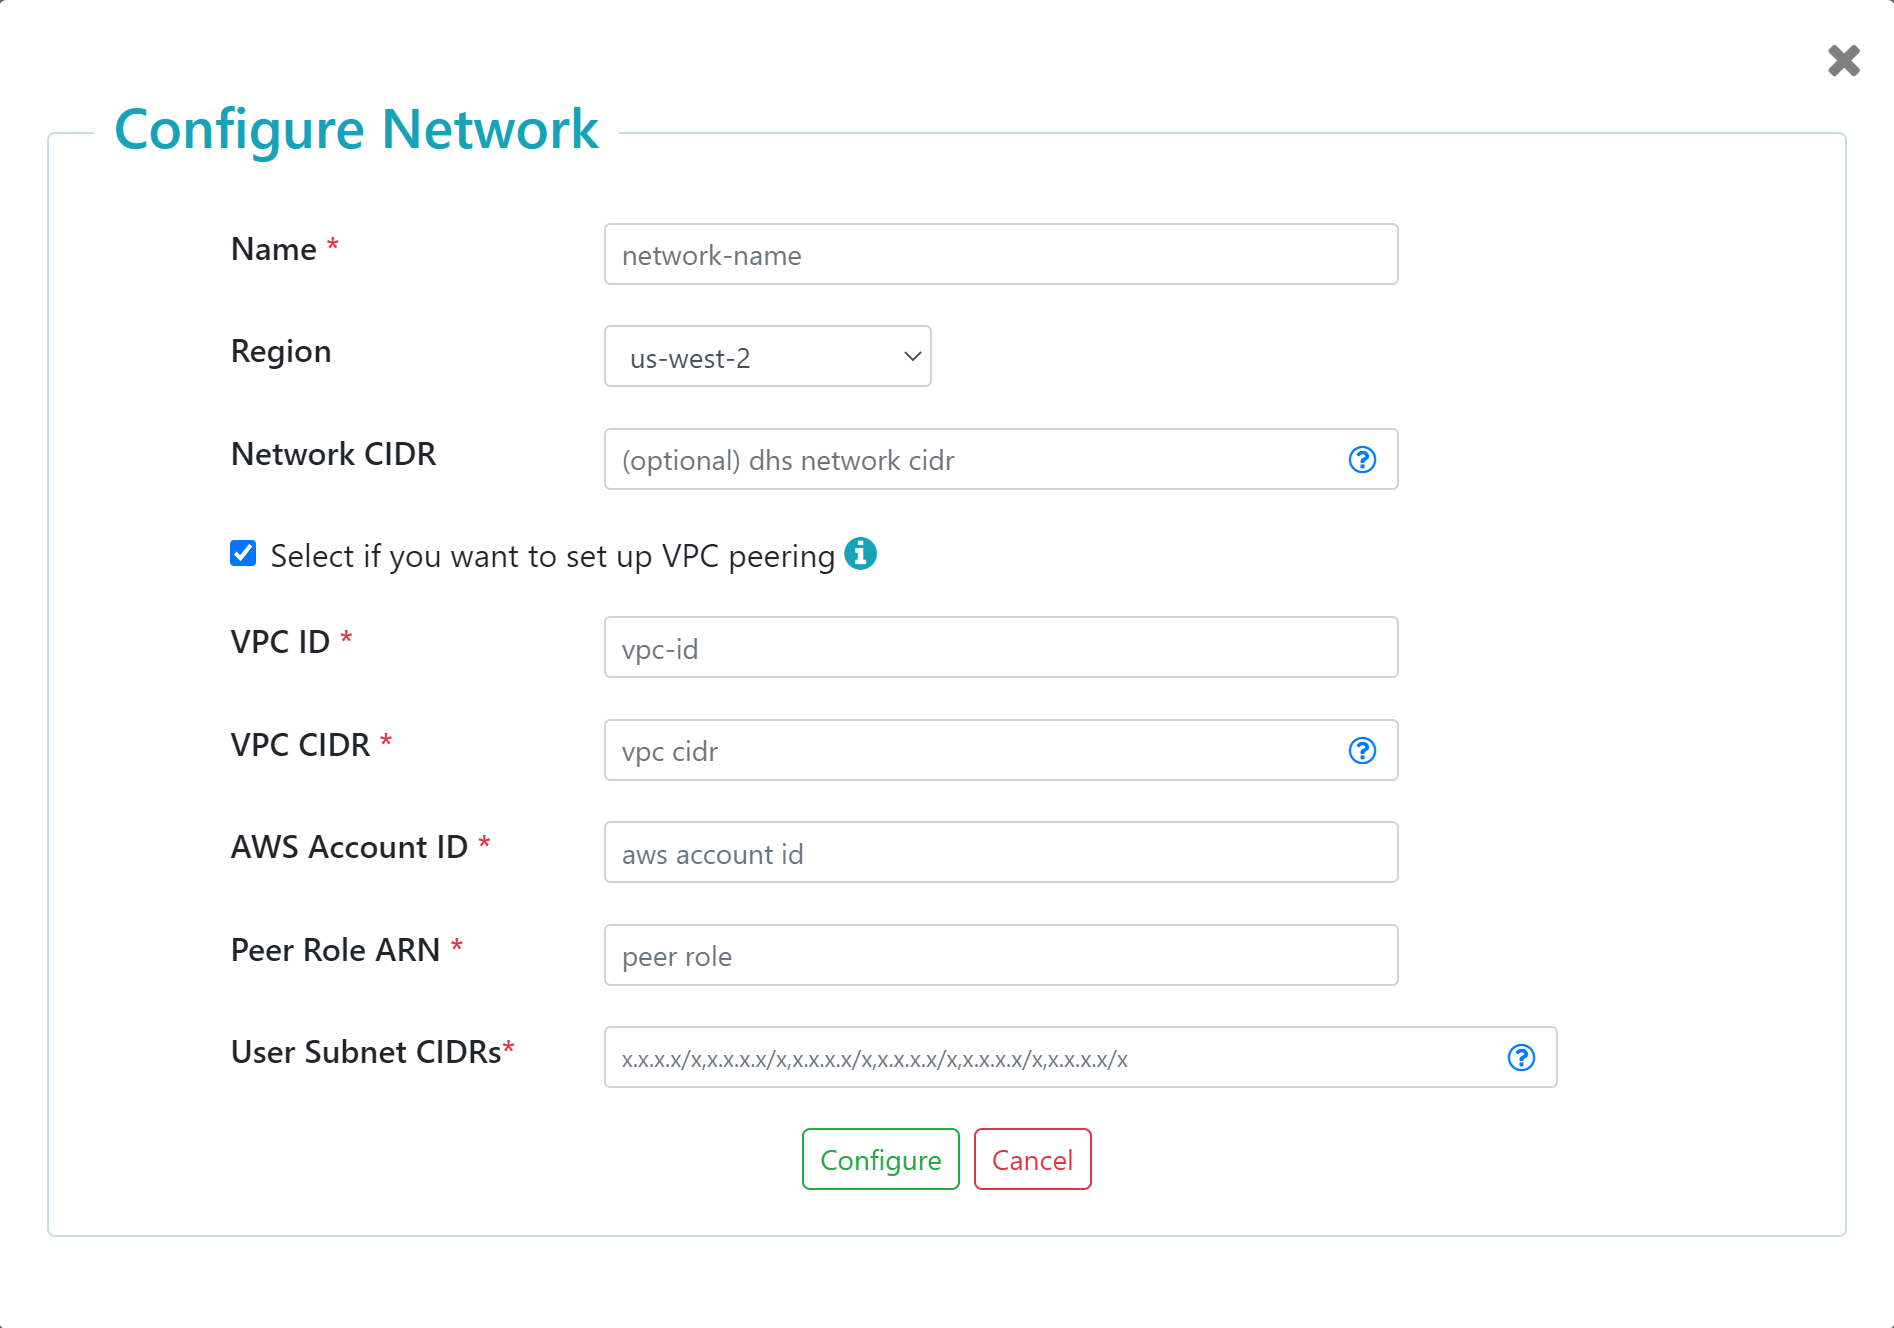 Configure Network page